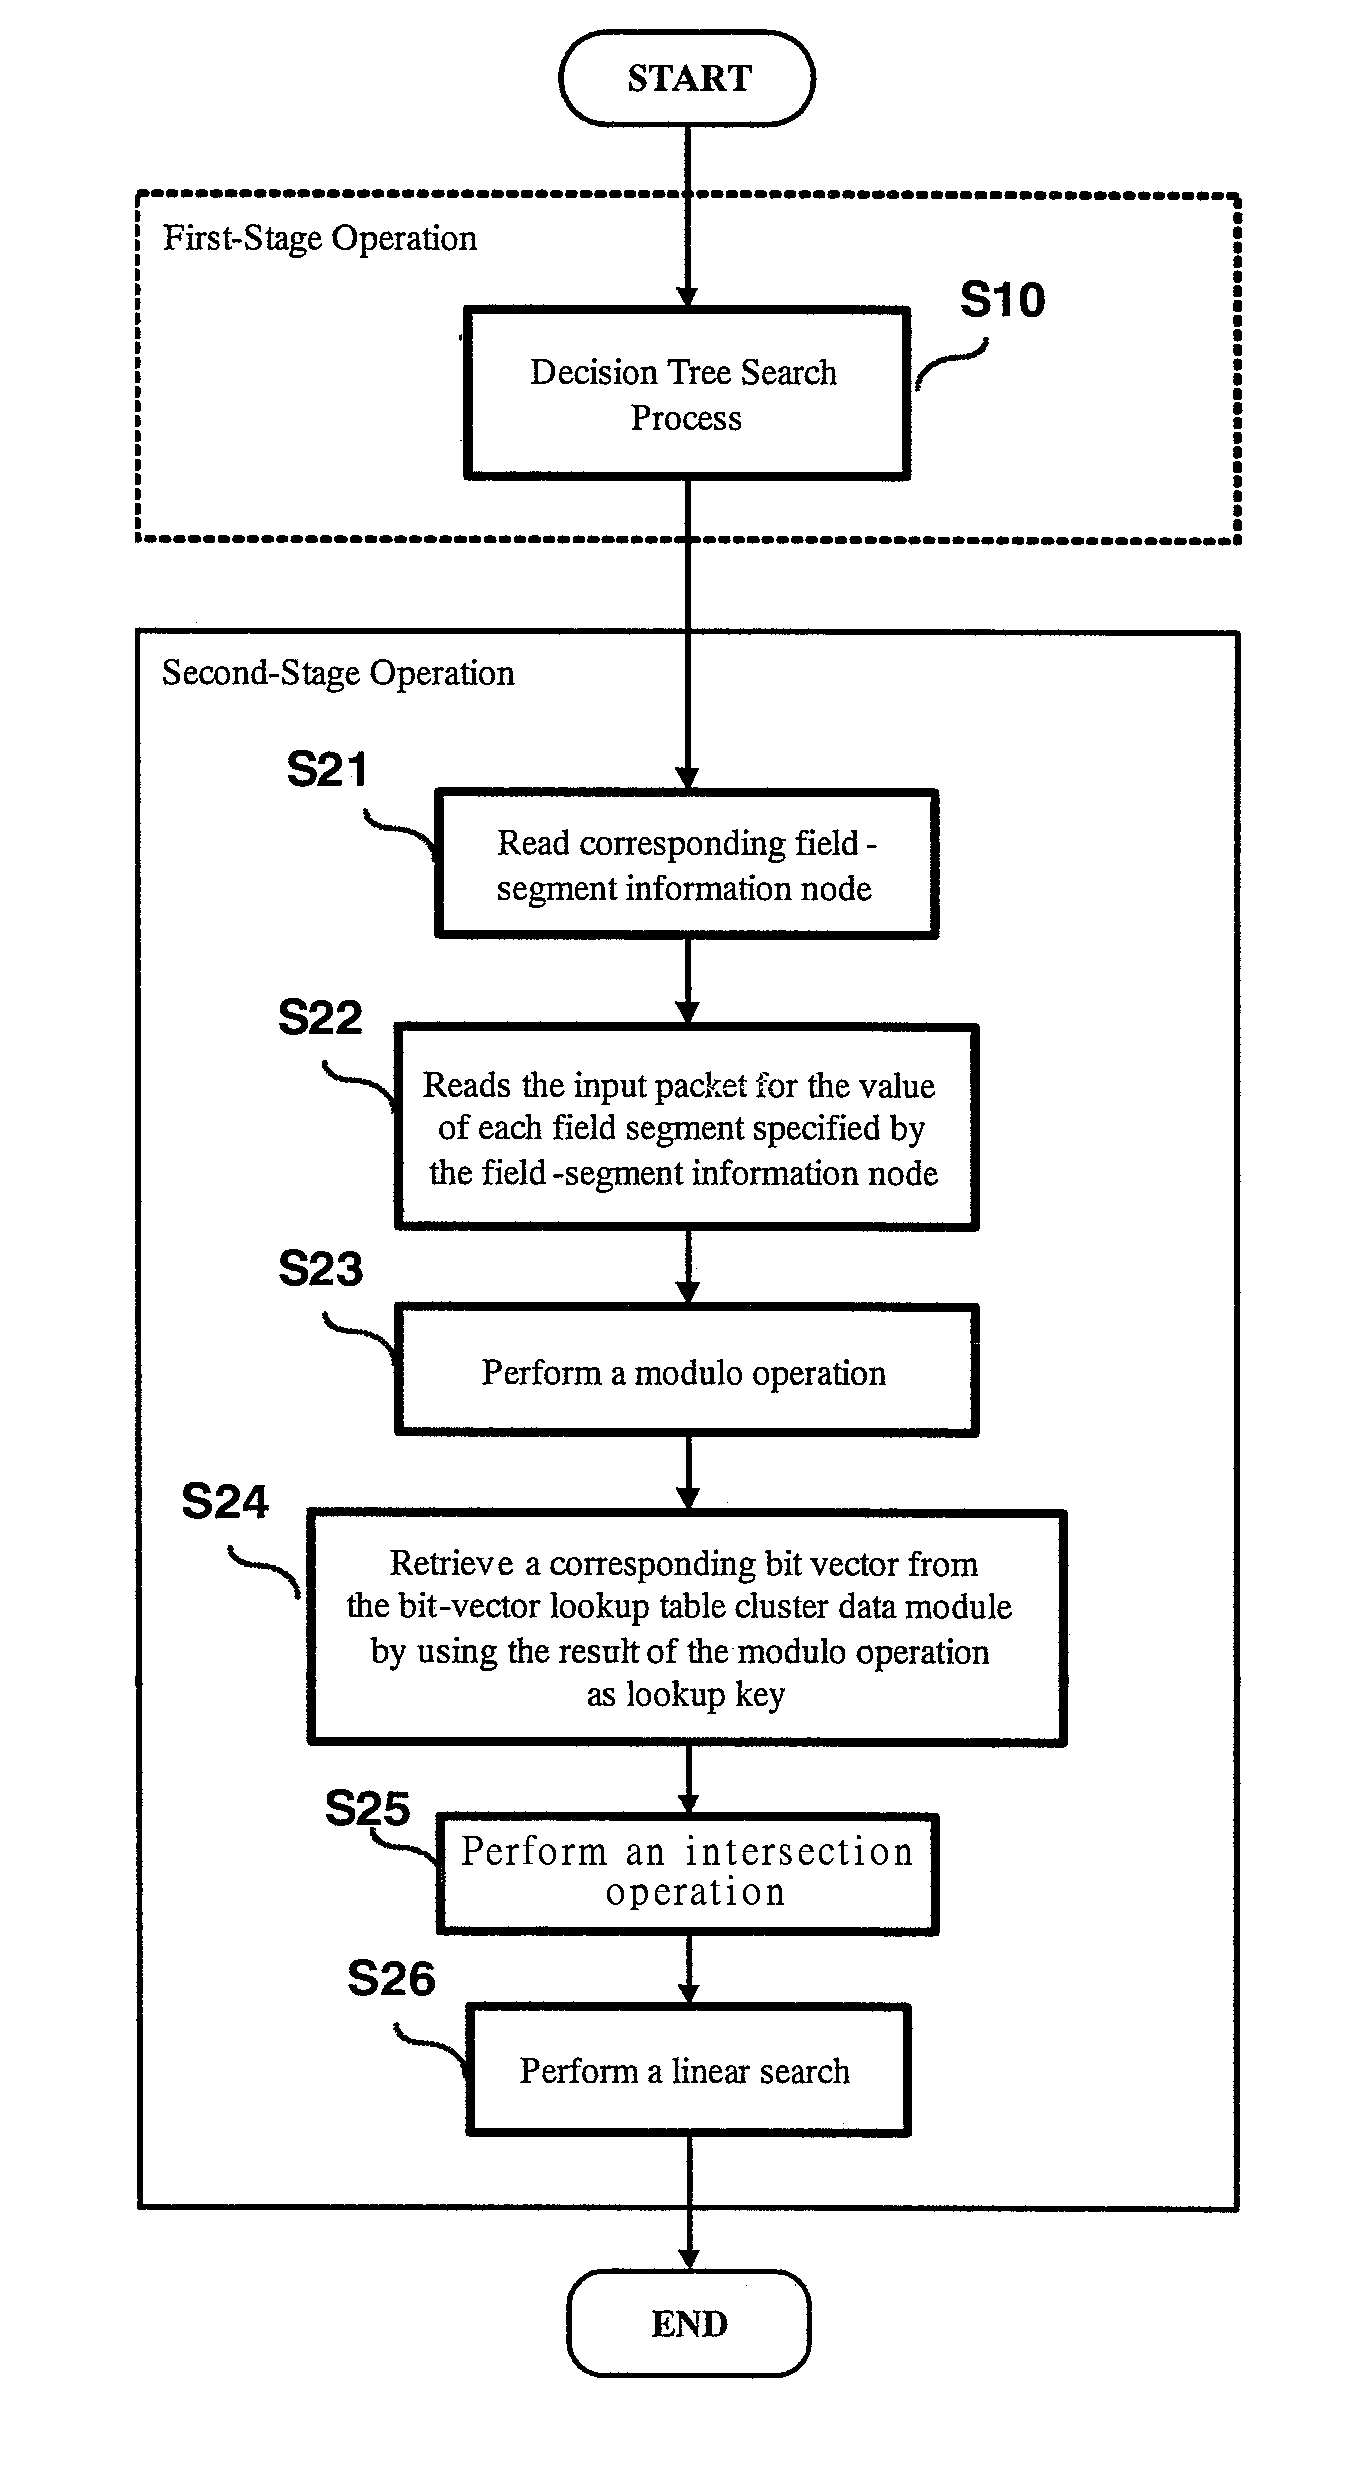 Two-stage computer network packet classification method and system